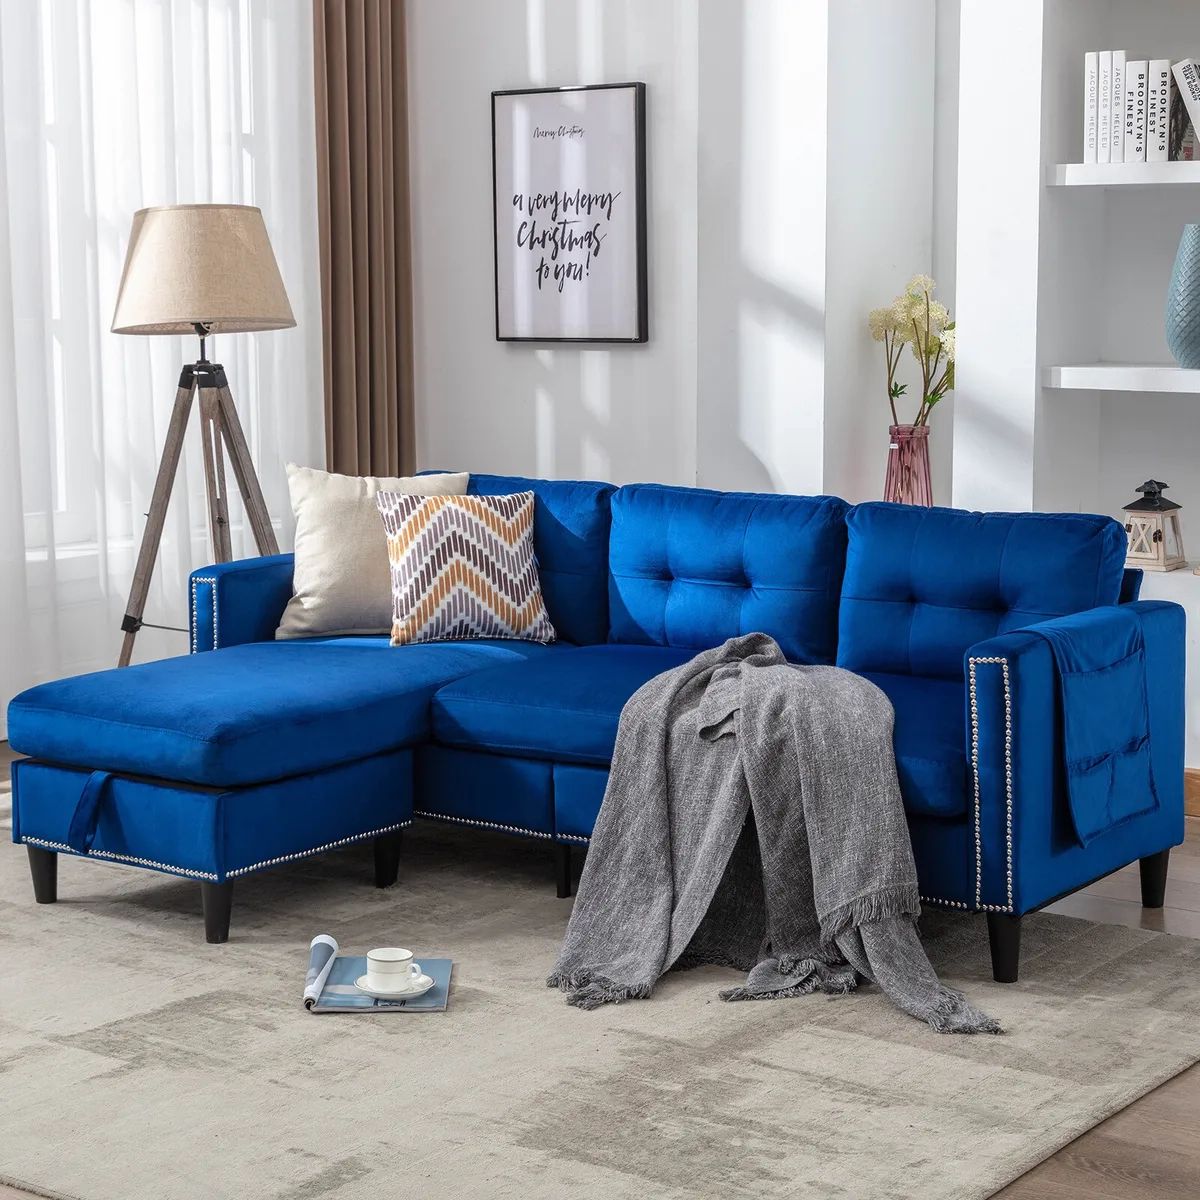 Blue Velvet L Shaped Convertible Sectional Sofa Couch Ottoman Chaise Usb  Storage | Ebay Pertaining To Convertible Sectional Sofa Couches (View 10 of 15)